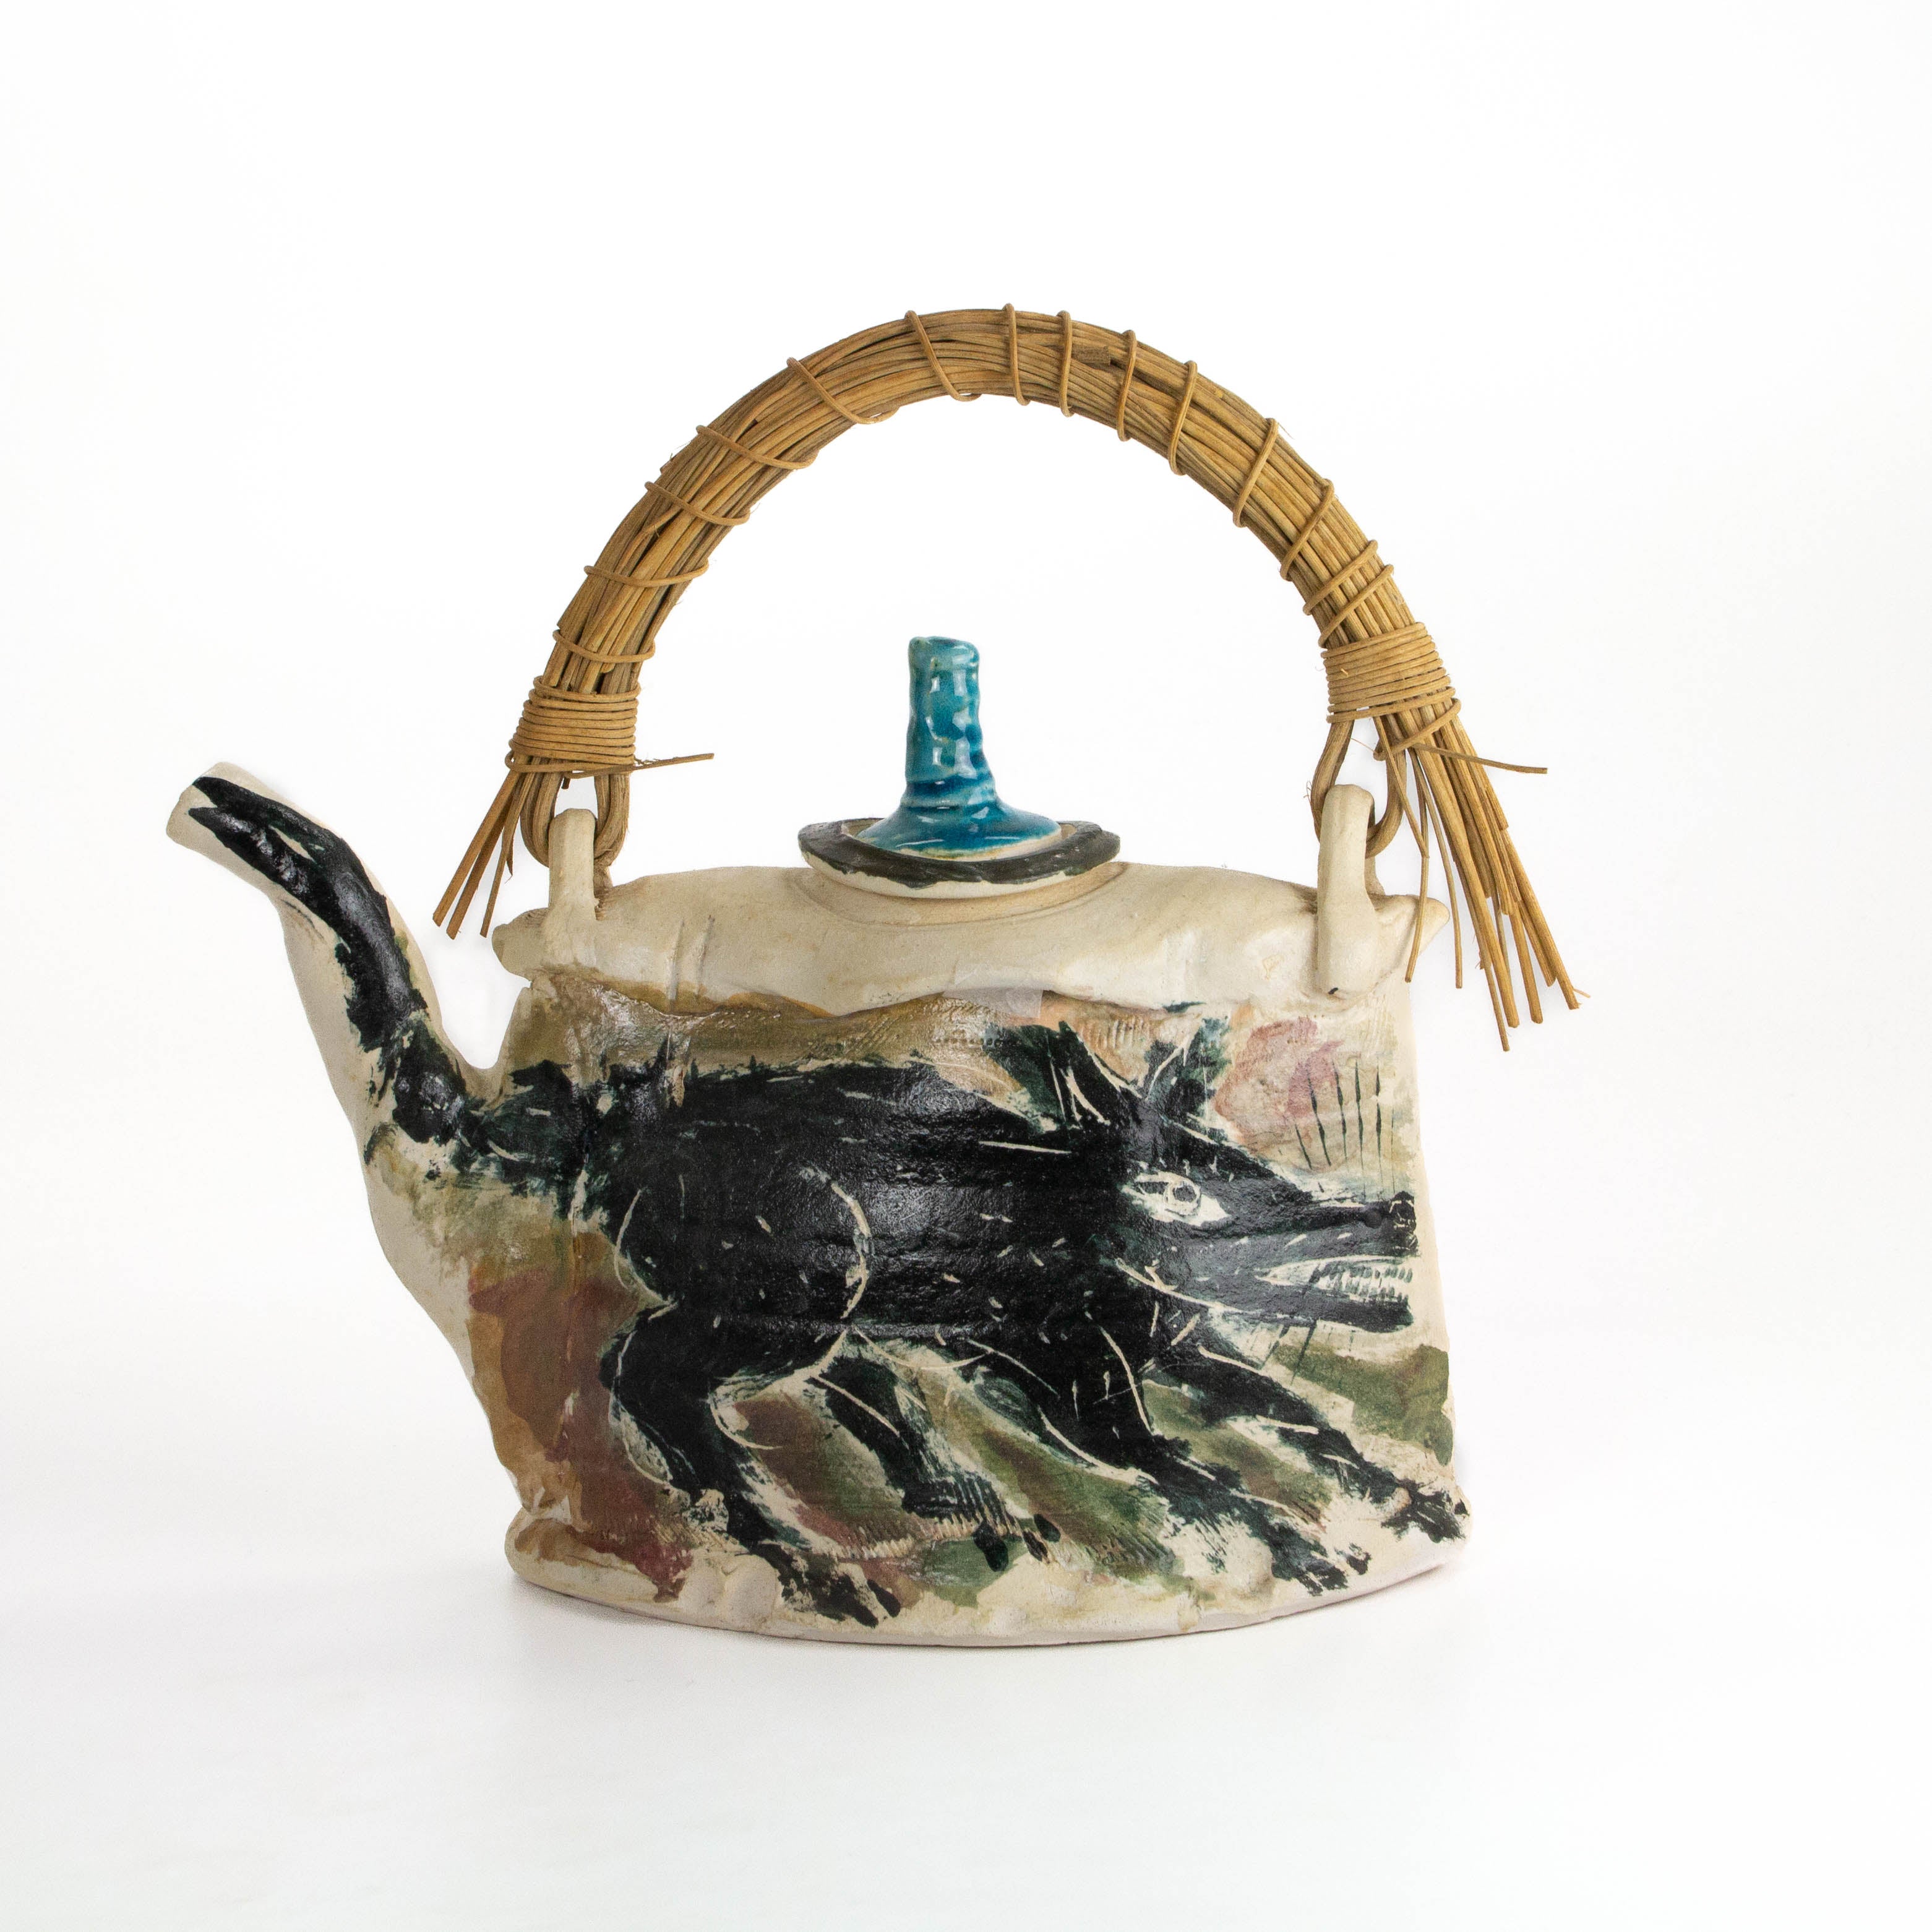 Teapot with Woven Handle